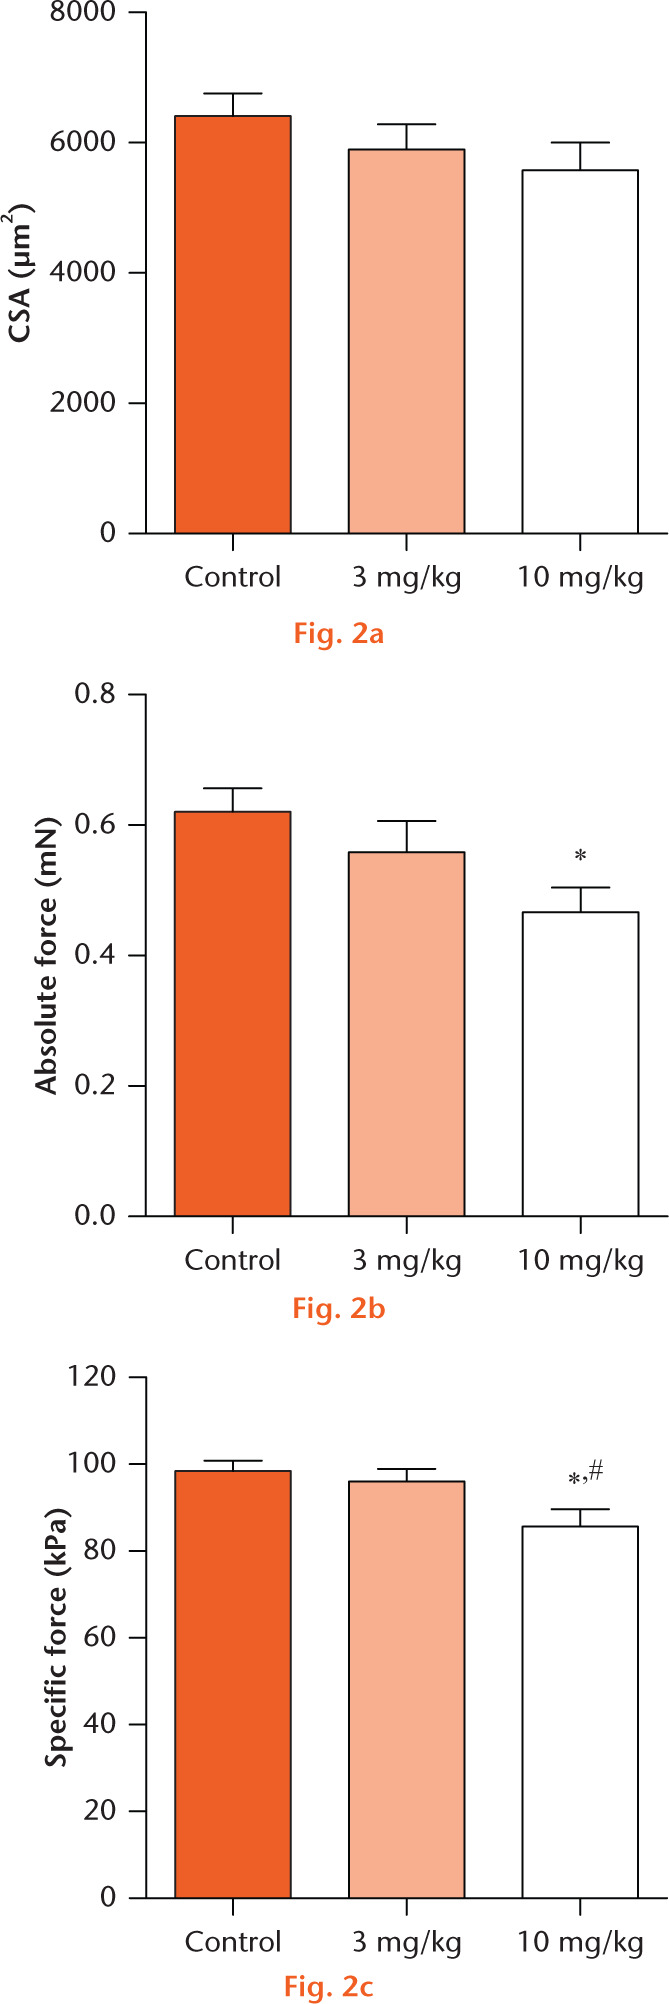  
          Permeabilised muscle fibre size and contractility: (a) permeabilised fibre cross-sectional area (CSA), (b) maximum isometric force (Fo) and (c) specific force (sFo) of 0 mg/kg, 3 mg/kg, and 10 mg/kg groups. Values are mean and standard error. Differences between groups were tested using a one-way analysis of variance (α = 0.05) followed by Fisher’s Least Significant Difference post hoc sorting. *, significantly different from 0 mg/kg; #, significantly different from 3 mg/kg (p < 0.05).
        